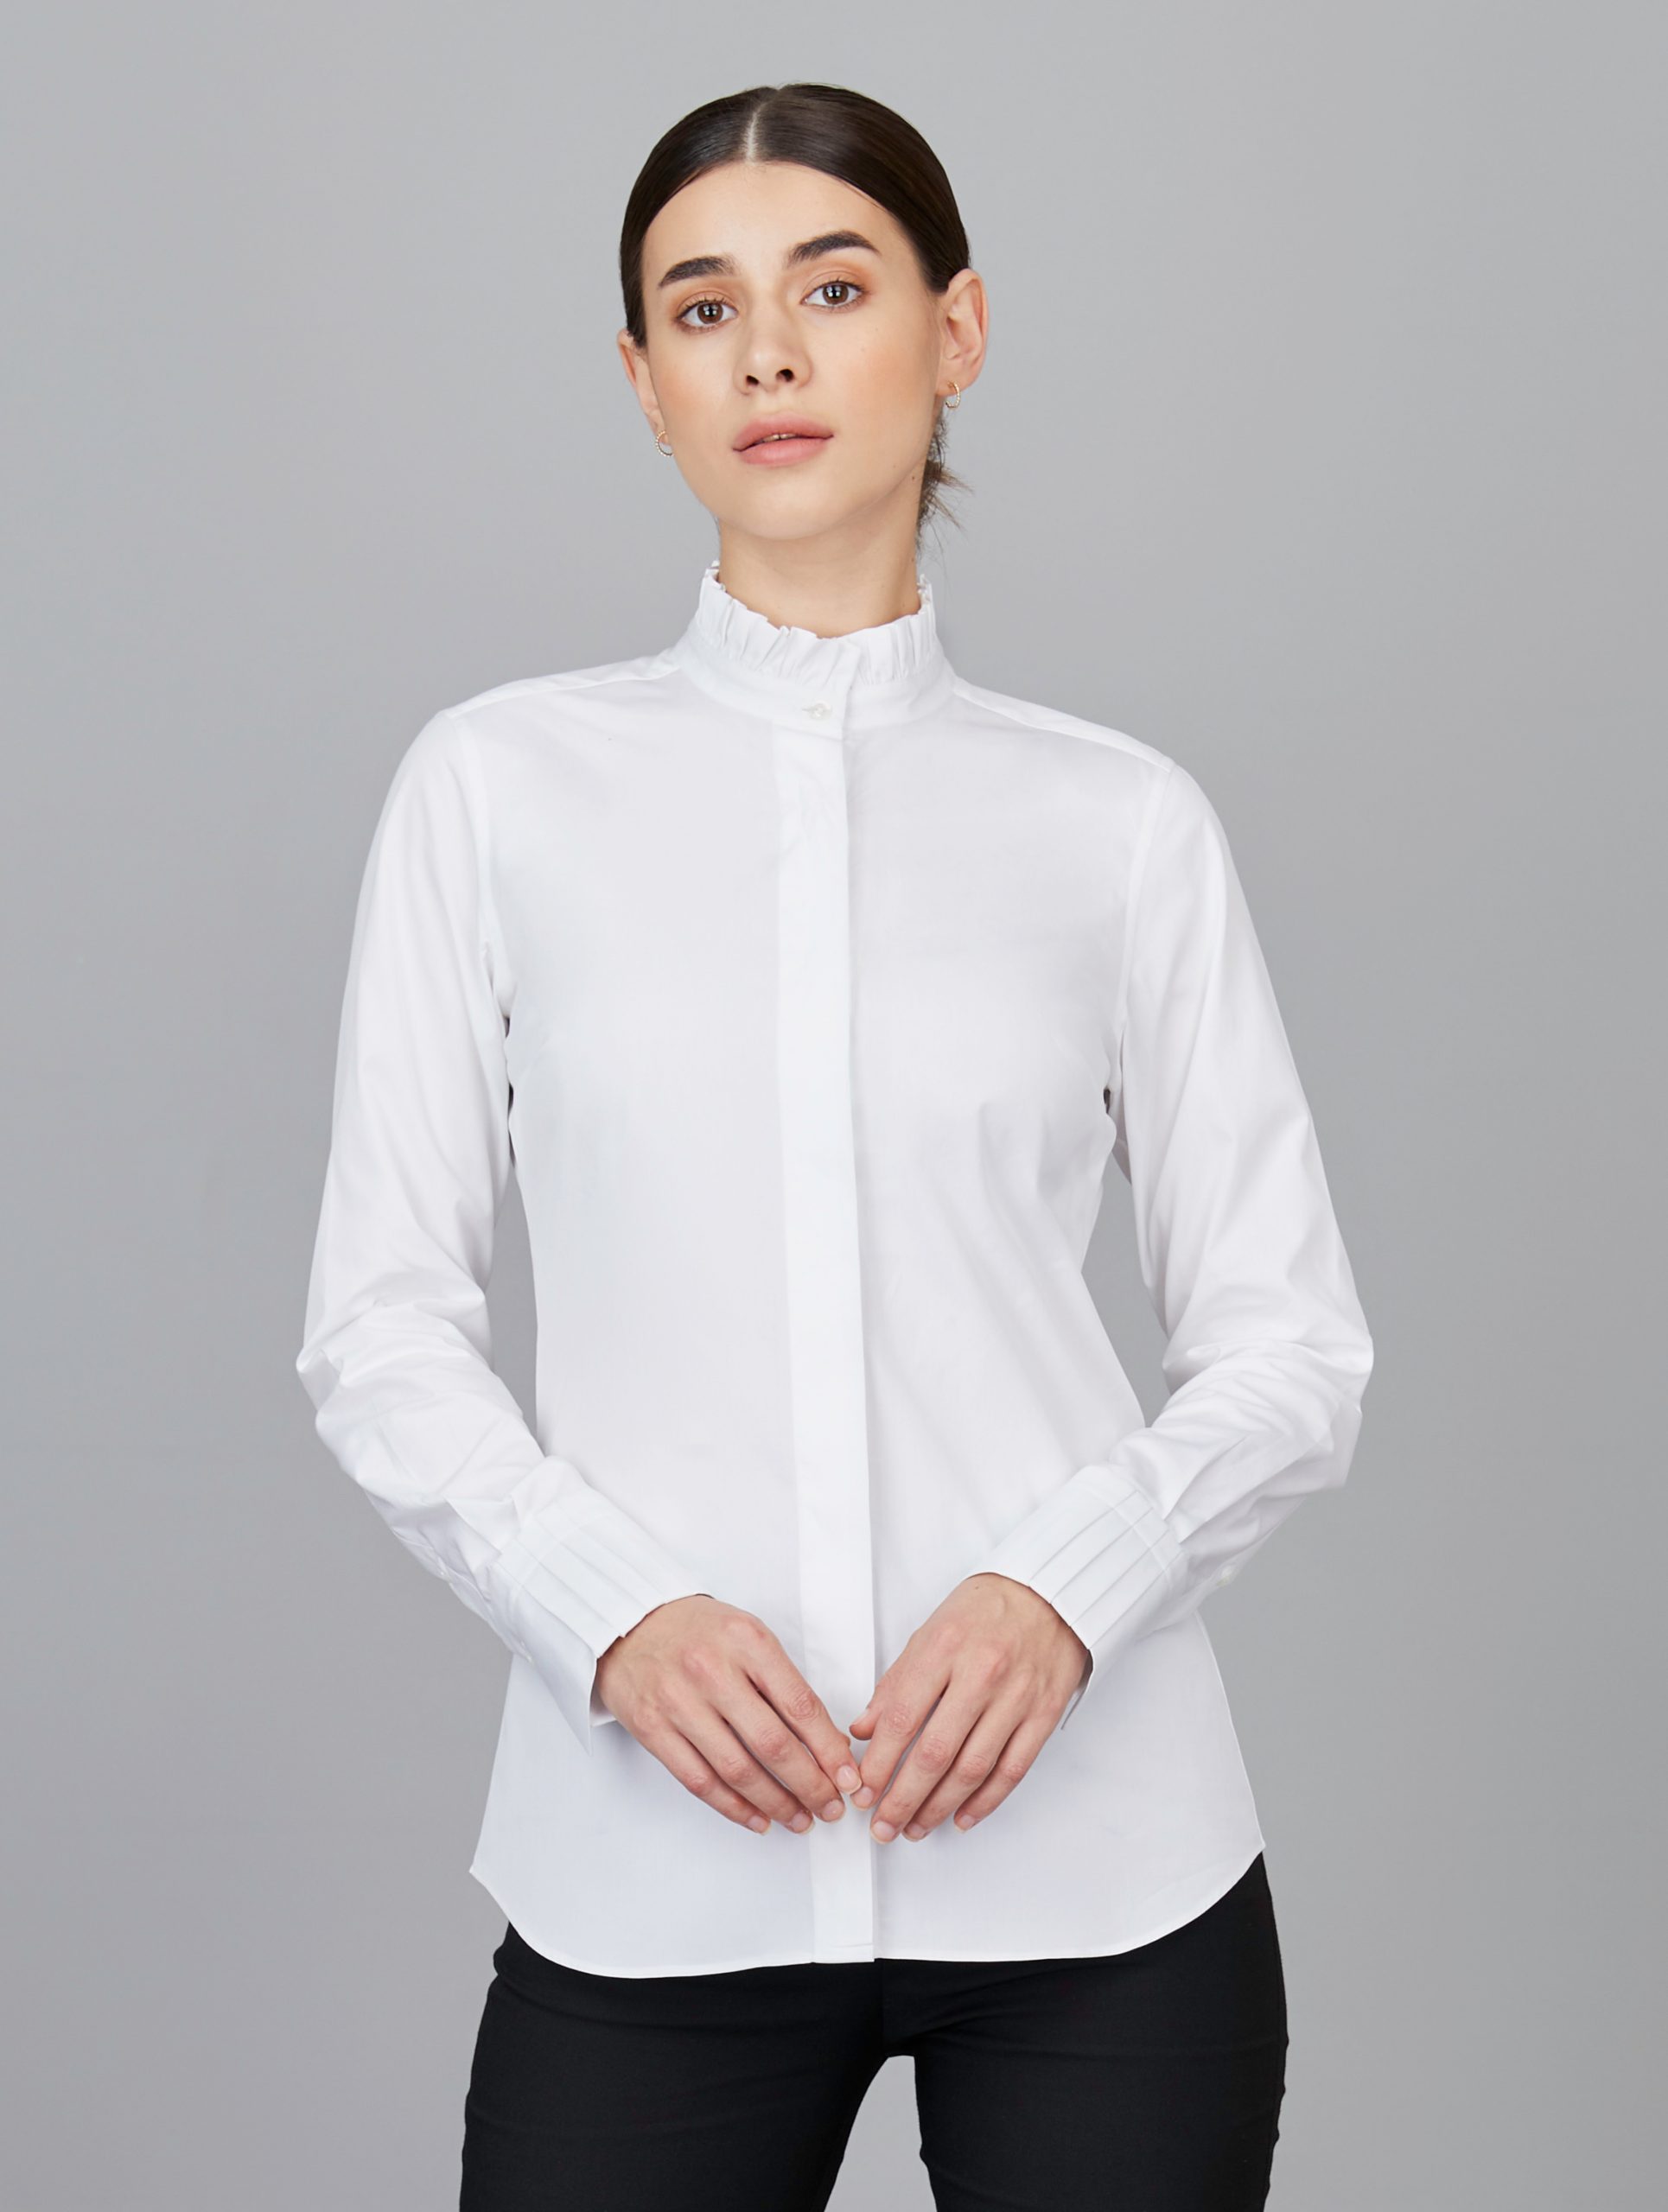 Shop for Formal Frilled Collar Shirt Online | Camessi Collection